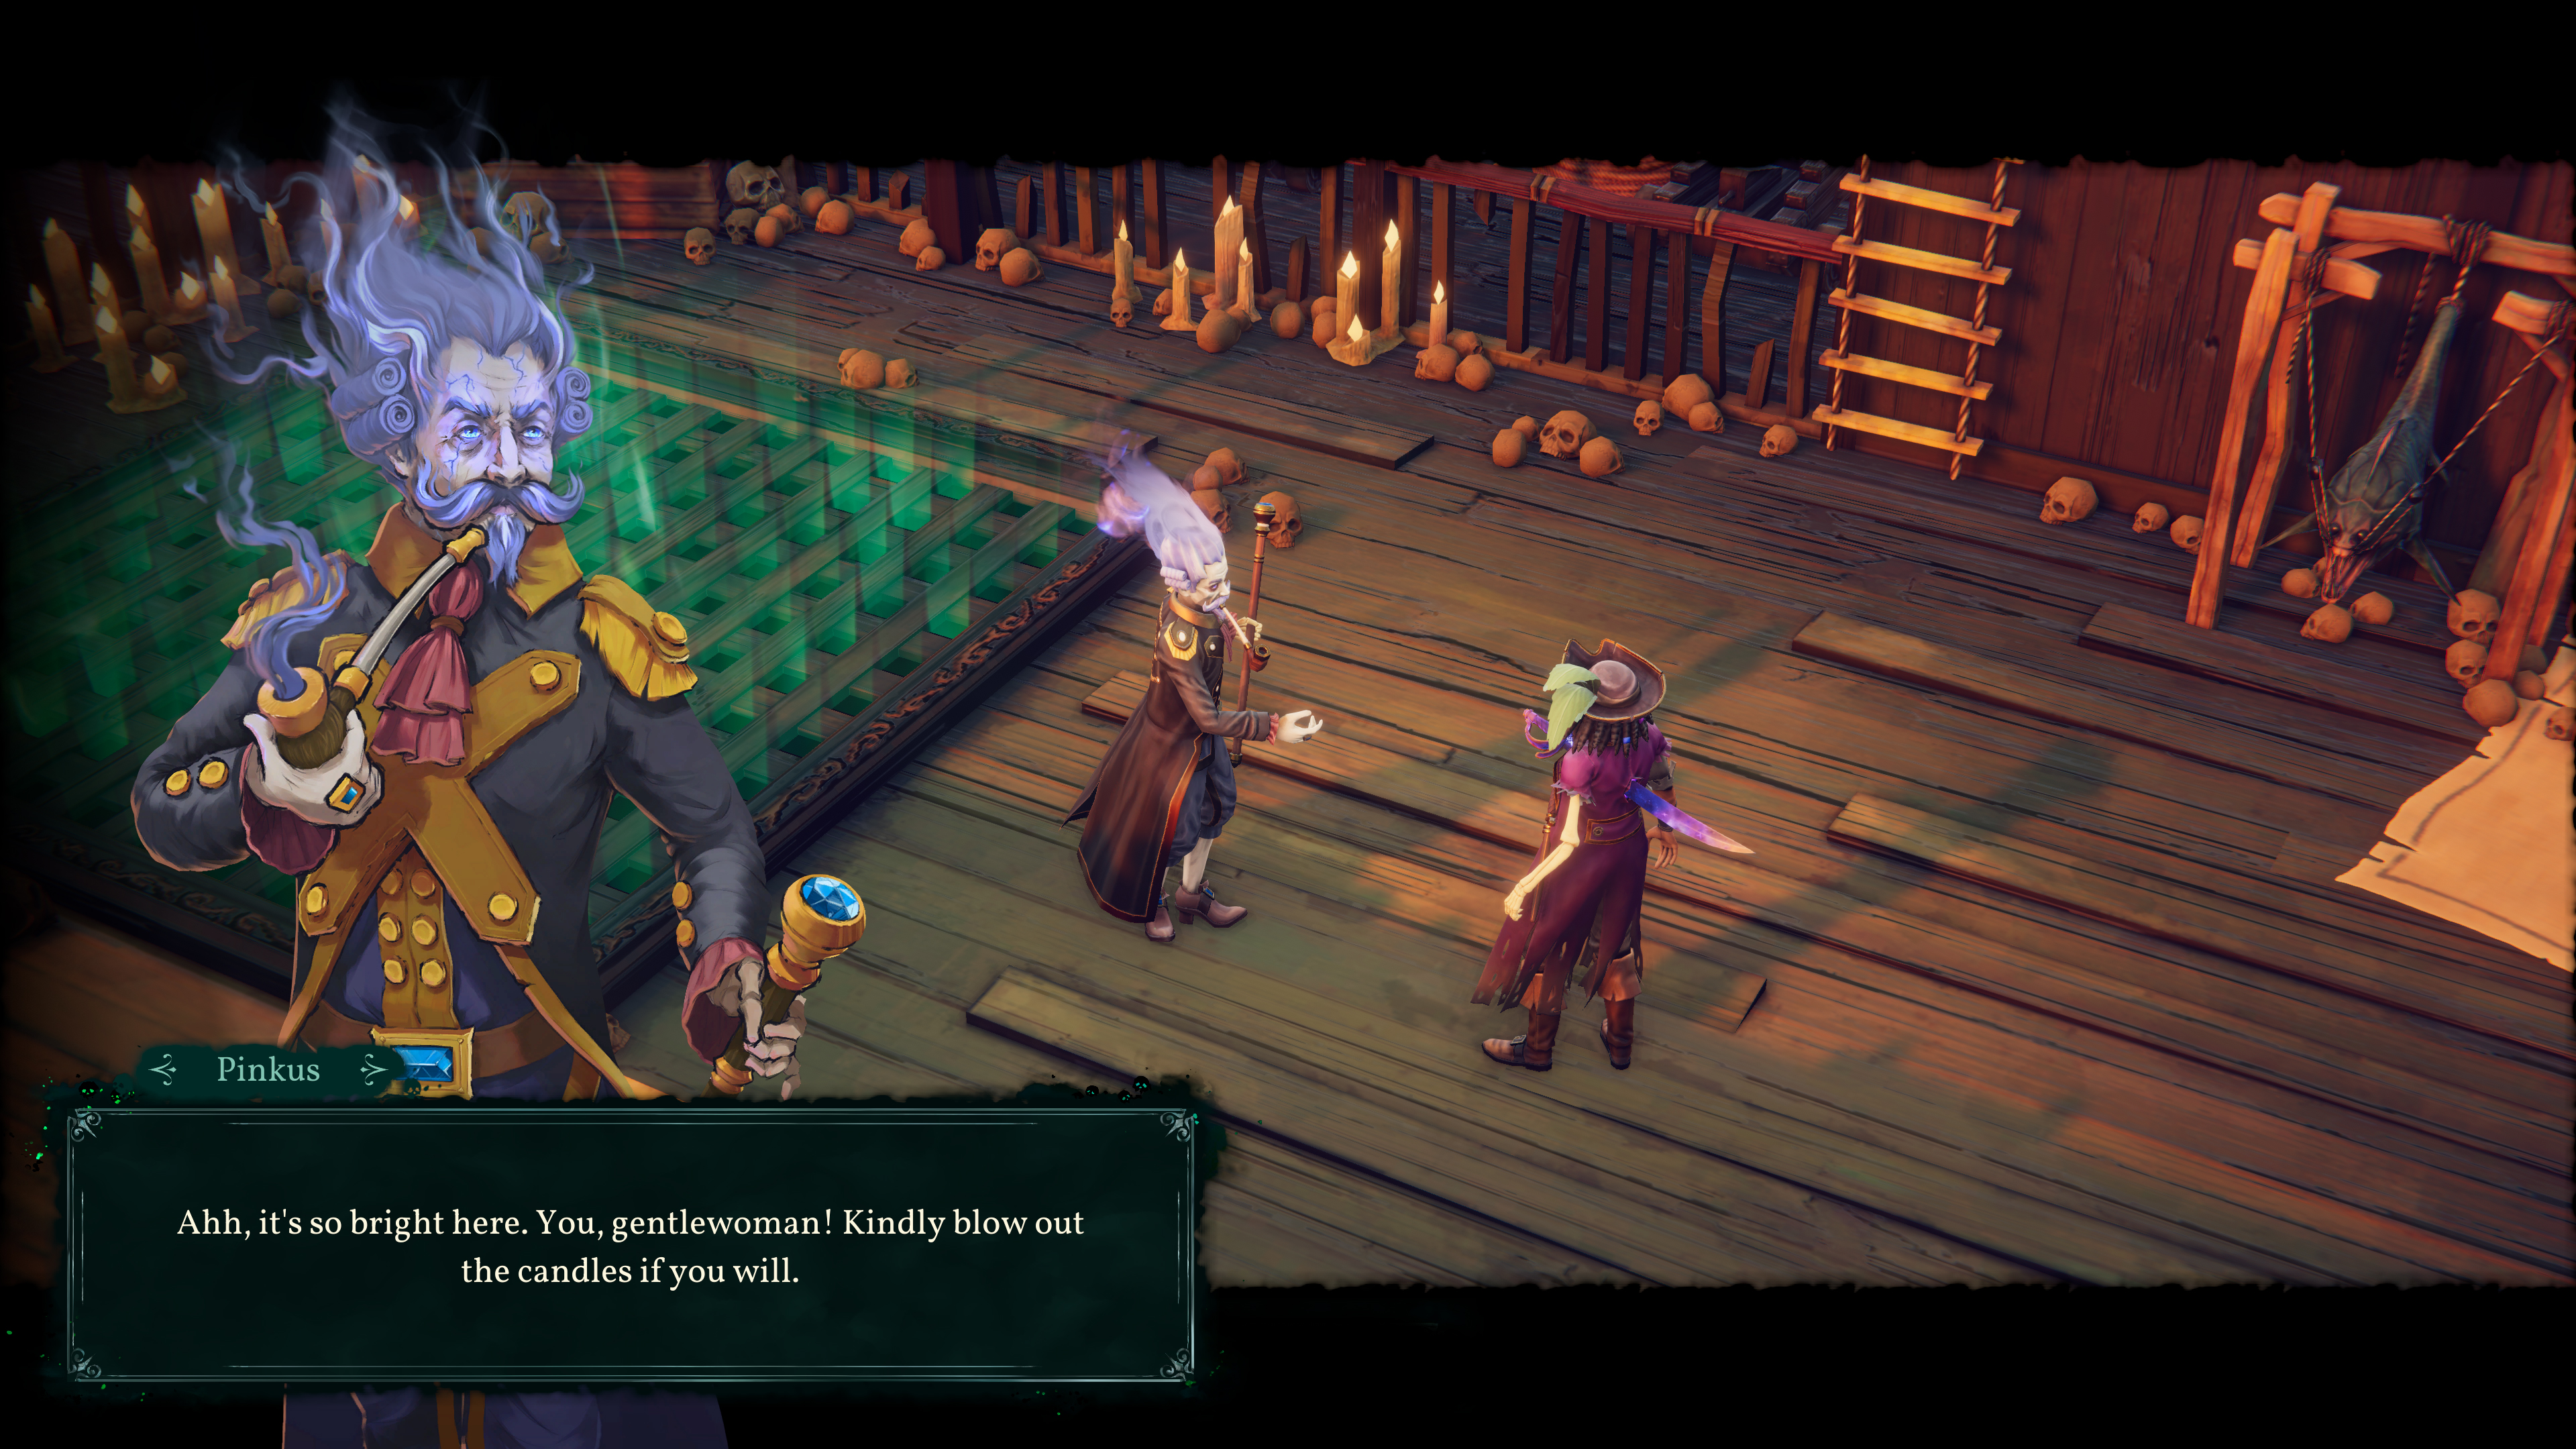 Shadow Gambit: The Cursed Crew Review (PS5) - Pieces of Eight